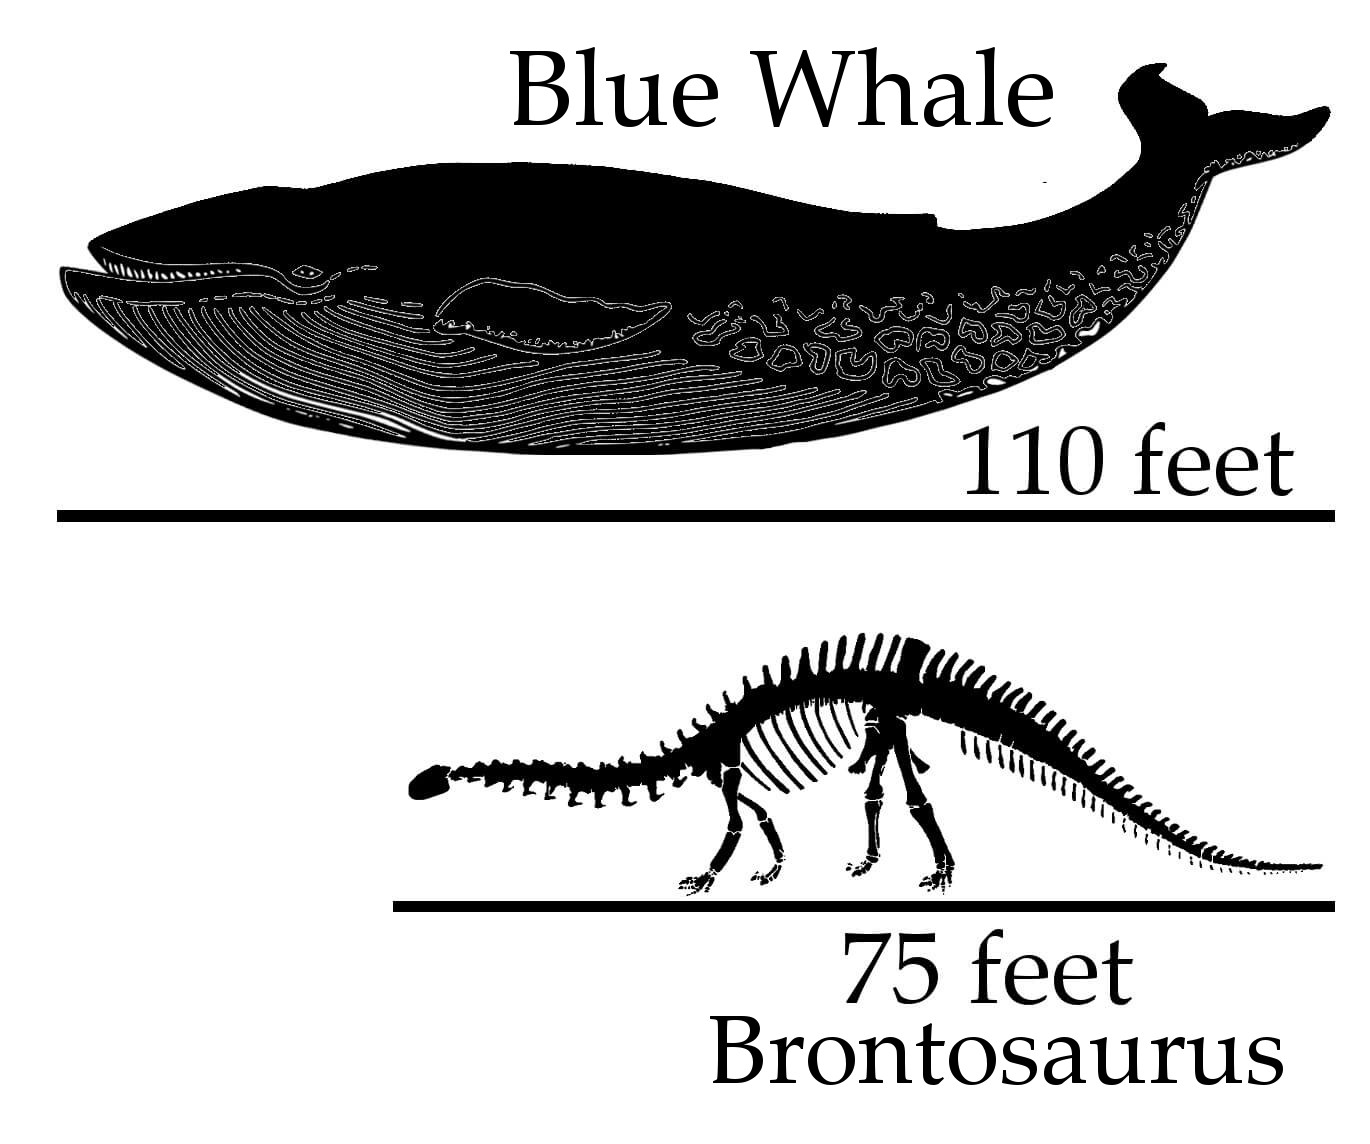 When it comes to size, there really isn't anything bigger than a Blue Whale. This massive animal is the largest mammal on earth and can reach lengths of up to 50 feet and weights of over 200 tons. They spend most of their lives feeding in the ocean depths, where they eat krill and small fish. However, when food becomes scarce, Blue Whales migrate into shallow waters and feed on plankton. While Blue Whales are huge, they aren't the biggest animals ever to walk the face of the earth. Dinosaur fossils show us that there were several species of giant reptiles that roamed our planet during the Mesozoic Era. Some of these monsters could grow to lengths of over 70 feet long and weighed nearly 15 tons. In fact, the largest dinosaur known to science today is actually a bird called the Argentinosaurus. These beasts grew to lengths of about 70 feet long and weighed around 80 tons. So next time you're out at the zoo looking at the elephants, giraffes, and hippos, keep in mind that even though they may seem enormous, they pale in comparison to the giants of the past. Comparing Blue Whale vs Dinosaurs The blue whale is the largest animal ever known to exist. But it isn't just big—it's huge. This massive creature grows up to 100 feet long and weighs over 200,000 pounds. Compare those numbers to some of the biggest dinosaurs ever found. They're much smaller, weighing less than 10 tons each. And while you might think the blue whale would win out because of its size, the dinosaur wins out by being four times heavier! Key Differences Between Blue Whale vs Dinosaurs The largest animal ever recorded is the blue whale. With a length of up to 35 meters, it’s about one million times bigger than the average dinosaur. Of course, there are some key differences between the size and weight of the blue whale and most dinosaurs found during the Mesozoic Era. For starters, the average blue whale weighs around 50 tons while the average T-Rex weighed over 2 tons. In fact, the heaviest dinosaur ever discovered weighed nearly 10 times as much as the average blue whale. This huge difference in size and mass is due to the different diets of each group of animals. In terms of size, the blue whale is actually smaller than the average dinosaur. A typical blue whale measures approximately 30 feet long while a T-rex measured 35 feet long. However, the average dinosaur was considerably larger than the blue whale. In fact, the biggest dinosaur ever discovered weighed almost twice as much as the average whale. While we might think that the blue whale is the biggest creature on Earth, it isn't quite true. That honor goes to the sperm whale. They measure around 40 feet long and weigh anywhere from 7,500 to 20,000 pounds. But even though the sperm whale is the largest living thing on Earth, it still doesn't compare to the size of the blue whales of ancient times. Back then, the blue whales grew to lengths of up to 60 feet and weights of up to 200 tons. And yes, those numbers include the blubber. So what exactly makes the blue whale such a big deal? Well, it's the sheer volume of food that they eat. It's estimated that the blue whale consumes roughly 8% of the oxygen produced by the planet every day. So, imagine eating enough food to require breathing air like that.  Blue Whale vs Dinosaurs: Length and Height The blue whale is one of nature’s greatest wonders, but it doesn’t hold a candle to some of the biggest animals that lived millions of years ago. A recent study found that the blue whale is actually smaller than many dinosaurs that existed during the Mesozoic Era, including the brontosaurus, triceratops, stegosaurus and pterodactyl. And although the blue whale is certainly impressive, it’s dwarfed by some of the giants that once walked the earth. Blue Whale vs Dinosaurs: Weight The blue whale is an incredibly massive creature, weighing up to 300 times more than the next heaviest mammal, the sperm whale. But the dinosaur reigns supreme among animals with a weight greater than the blue whale. In fact, there are several different types of dinosaurs that weigh almost twice as much as the blue whale, including Brachiosaurus, Argentinosaurus, and Diplodocus. While no one would deny the facts stated above, there is one thing that most people don't know about the blue whale: it isn't actually blue. Blue whales aren't born blue; rather, they start out greyish white and turn blue later in life. Blue Whale vs Dinosaurs: Diet The largest animal ever recorded in existence is the blue whale. With a length of up to 40 meters and weighing around 200 tons, it dwarfs most land mammals, including elephants. Blue whales feed on small organisms such as krill, plankton and fish. They filter food out of the water column with baleen plates in their mouth. A few types of dinosaur had similar body proportions to blue whales today. However, none of them reached the size of a blue whale. But why do we think that blue whales are bigger than dinosaurs? Blue Whale vs Dinosaurs: Predators Something interesting to note about both giant blue whales and ancient dinosaurs is the fact that neither species faces many natural predators. Back in our prehistoric era, dinosaurs faced a number of potential dangers, including large reptiles like crocodiles and Komodo dragons. In addition, some dinosaur species had to contend with being hunted by other dinosaurs. However, both blue whales and dinosaurs were threatened at a young age, as young animals are much smaller than adults. Blue whales are routinely preyed upon by orcas and killer whales, while young dinosaur species are often attacked by carnivorous dinosaurs. While adult blue whales and dinosaurs are too big to be eaten, young ones are easy targets. Blue Whale vs Dinosaurs: Size Comparisons When it comes to comparing the size of both the blue whale (the biggest animal ever known) and a variety of large dinosaur species, what can we even do to fathom their height and weight? The blue whale measures up to 2.5 school buses long and weighs anywhere from 3 million to 5 million pounds. In contrast, the largest of the large dinosaur species measured up to 4x larger than the Eiffel Tower and weighed around 20 million pounds! These are only one example of each of these creature’s sizes, and it’s unlikely that either will give you the full picture of just how big these animals really were. 